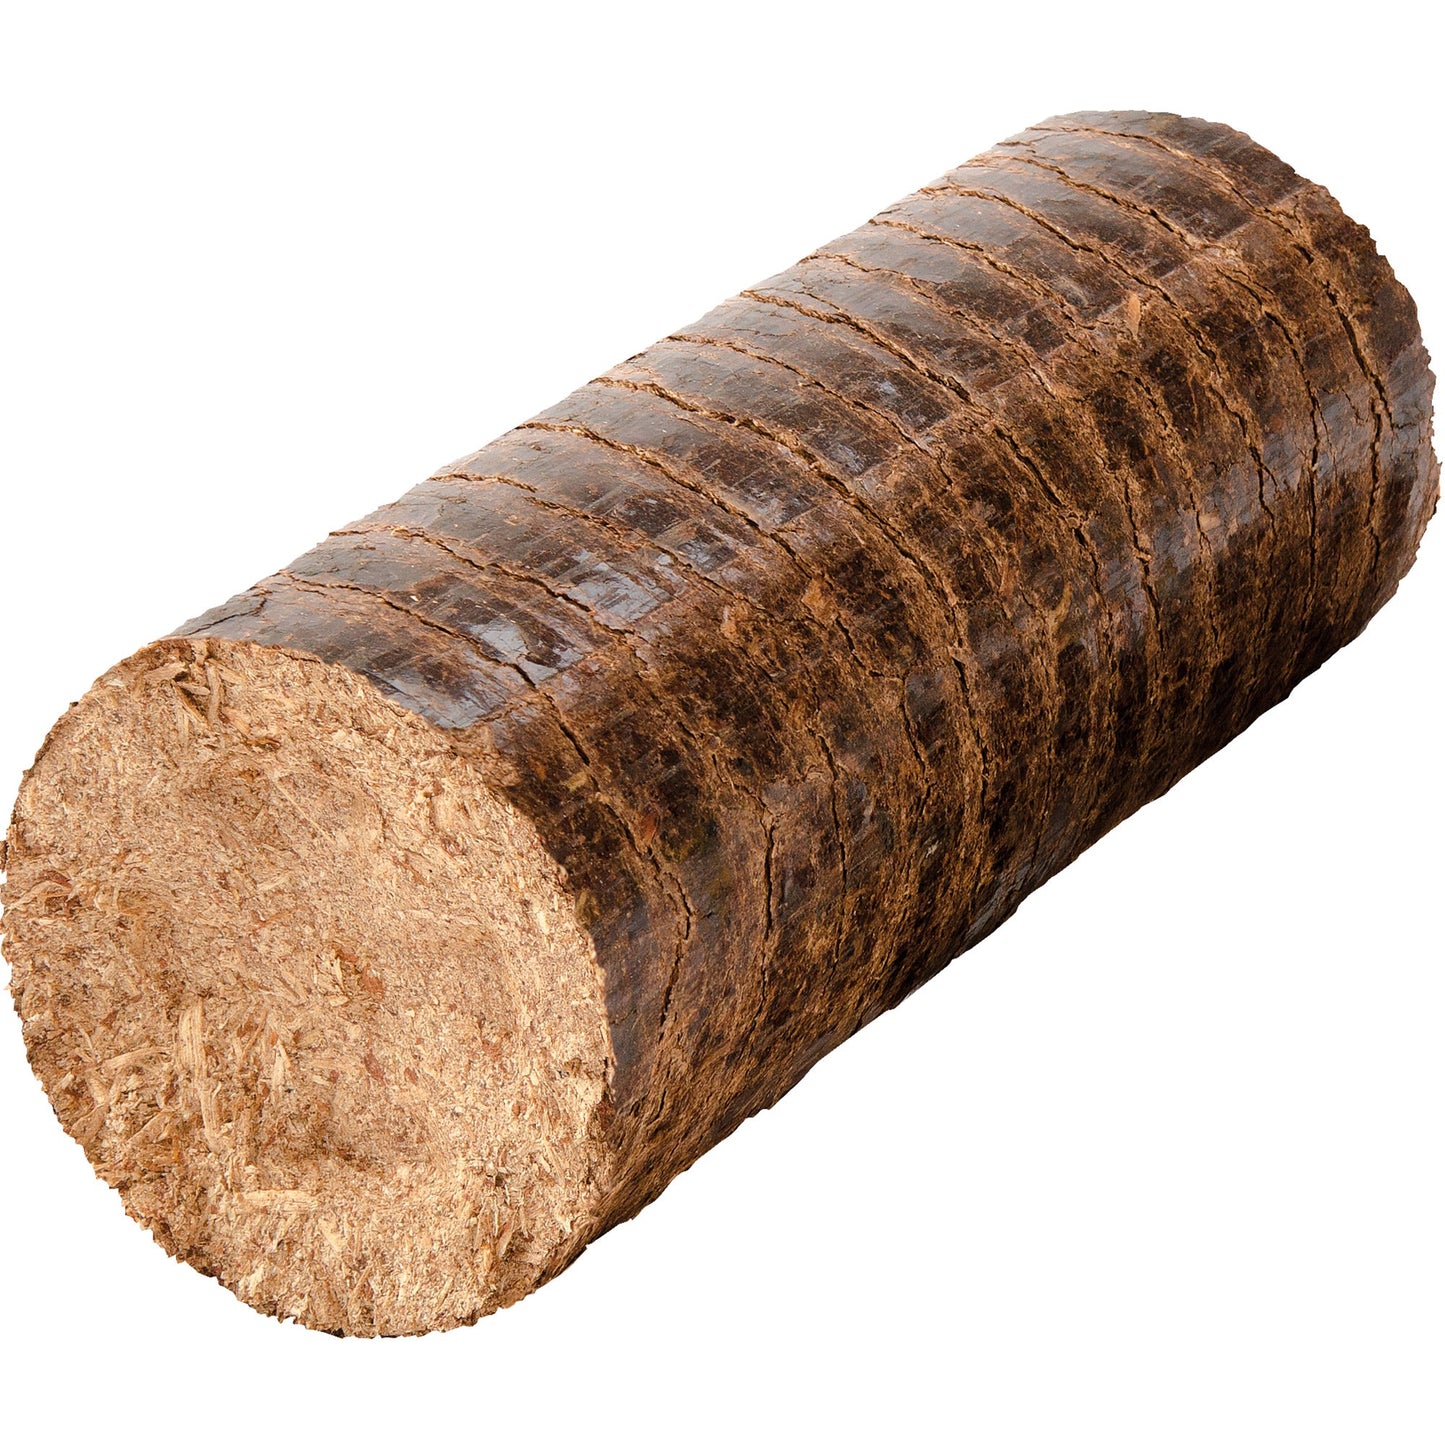 Eco Firewood Eucalyptus 7kg Hot Burning Briquettes for Open fires, charcoal & kiln dried log eco-alternative. (1 Pack)